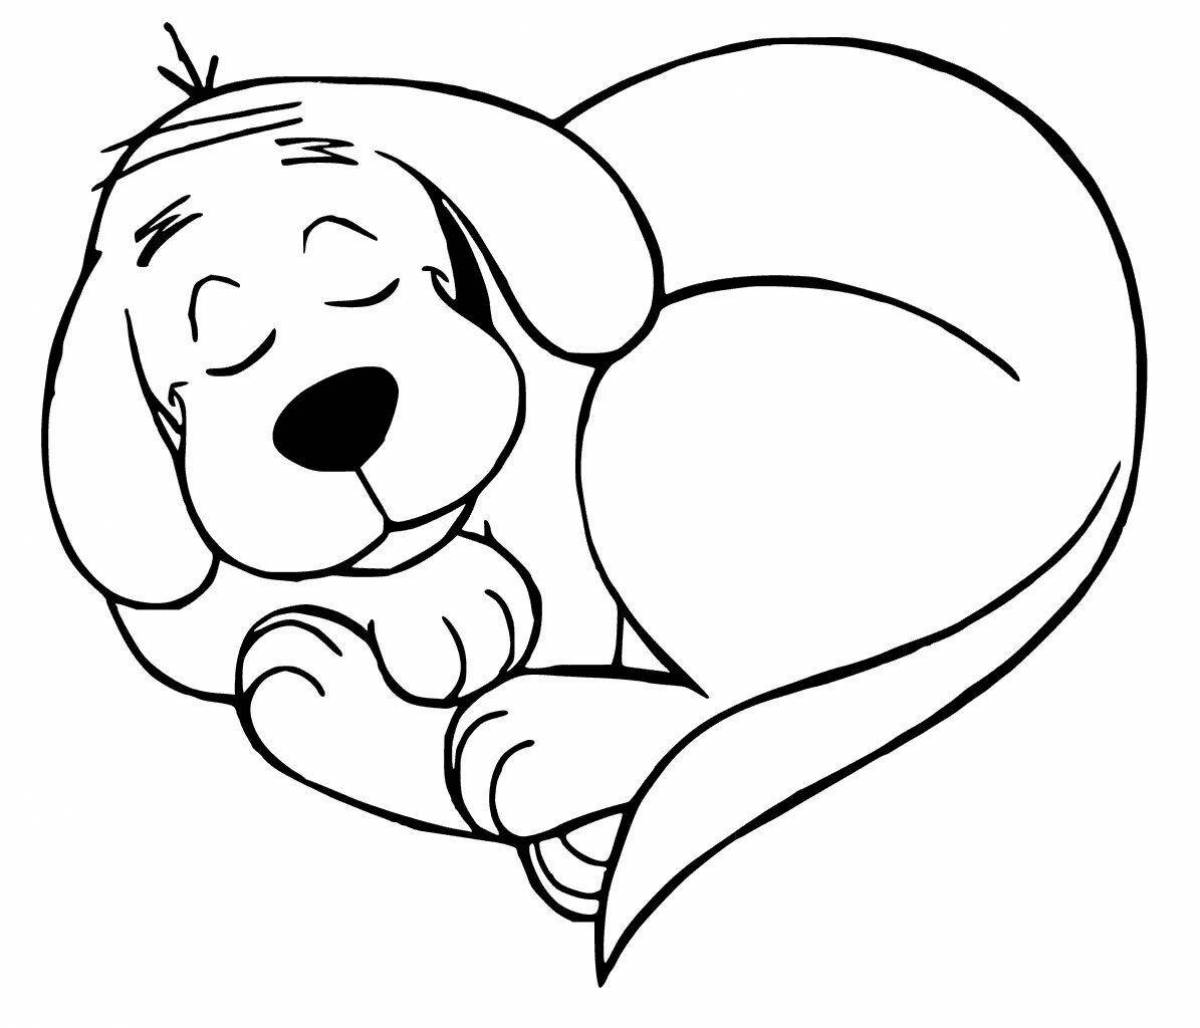 Coloring page waggling puppy